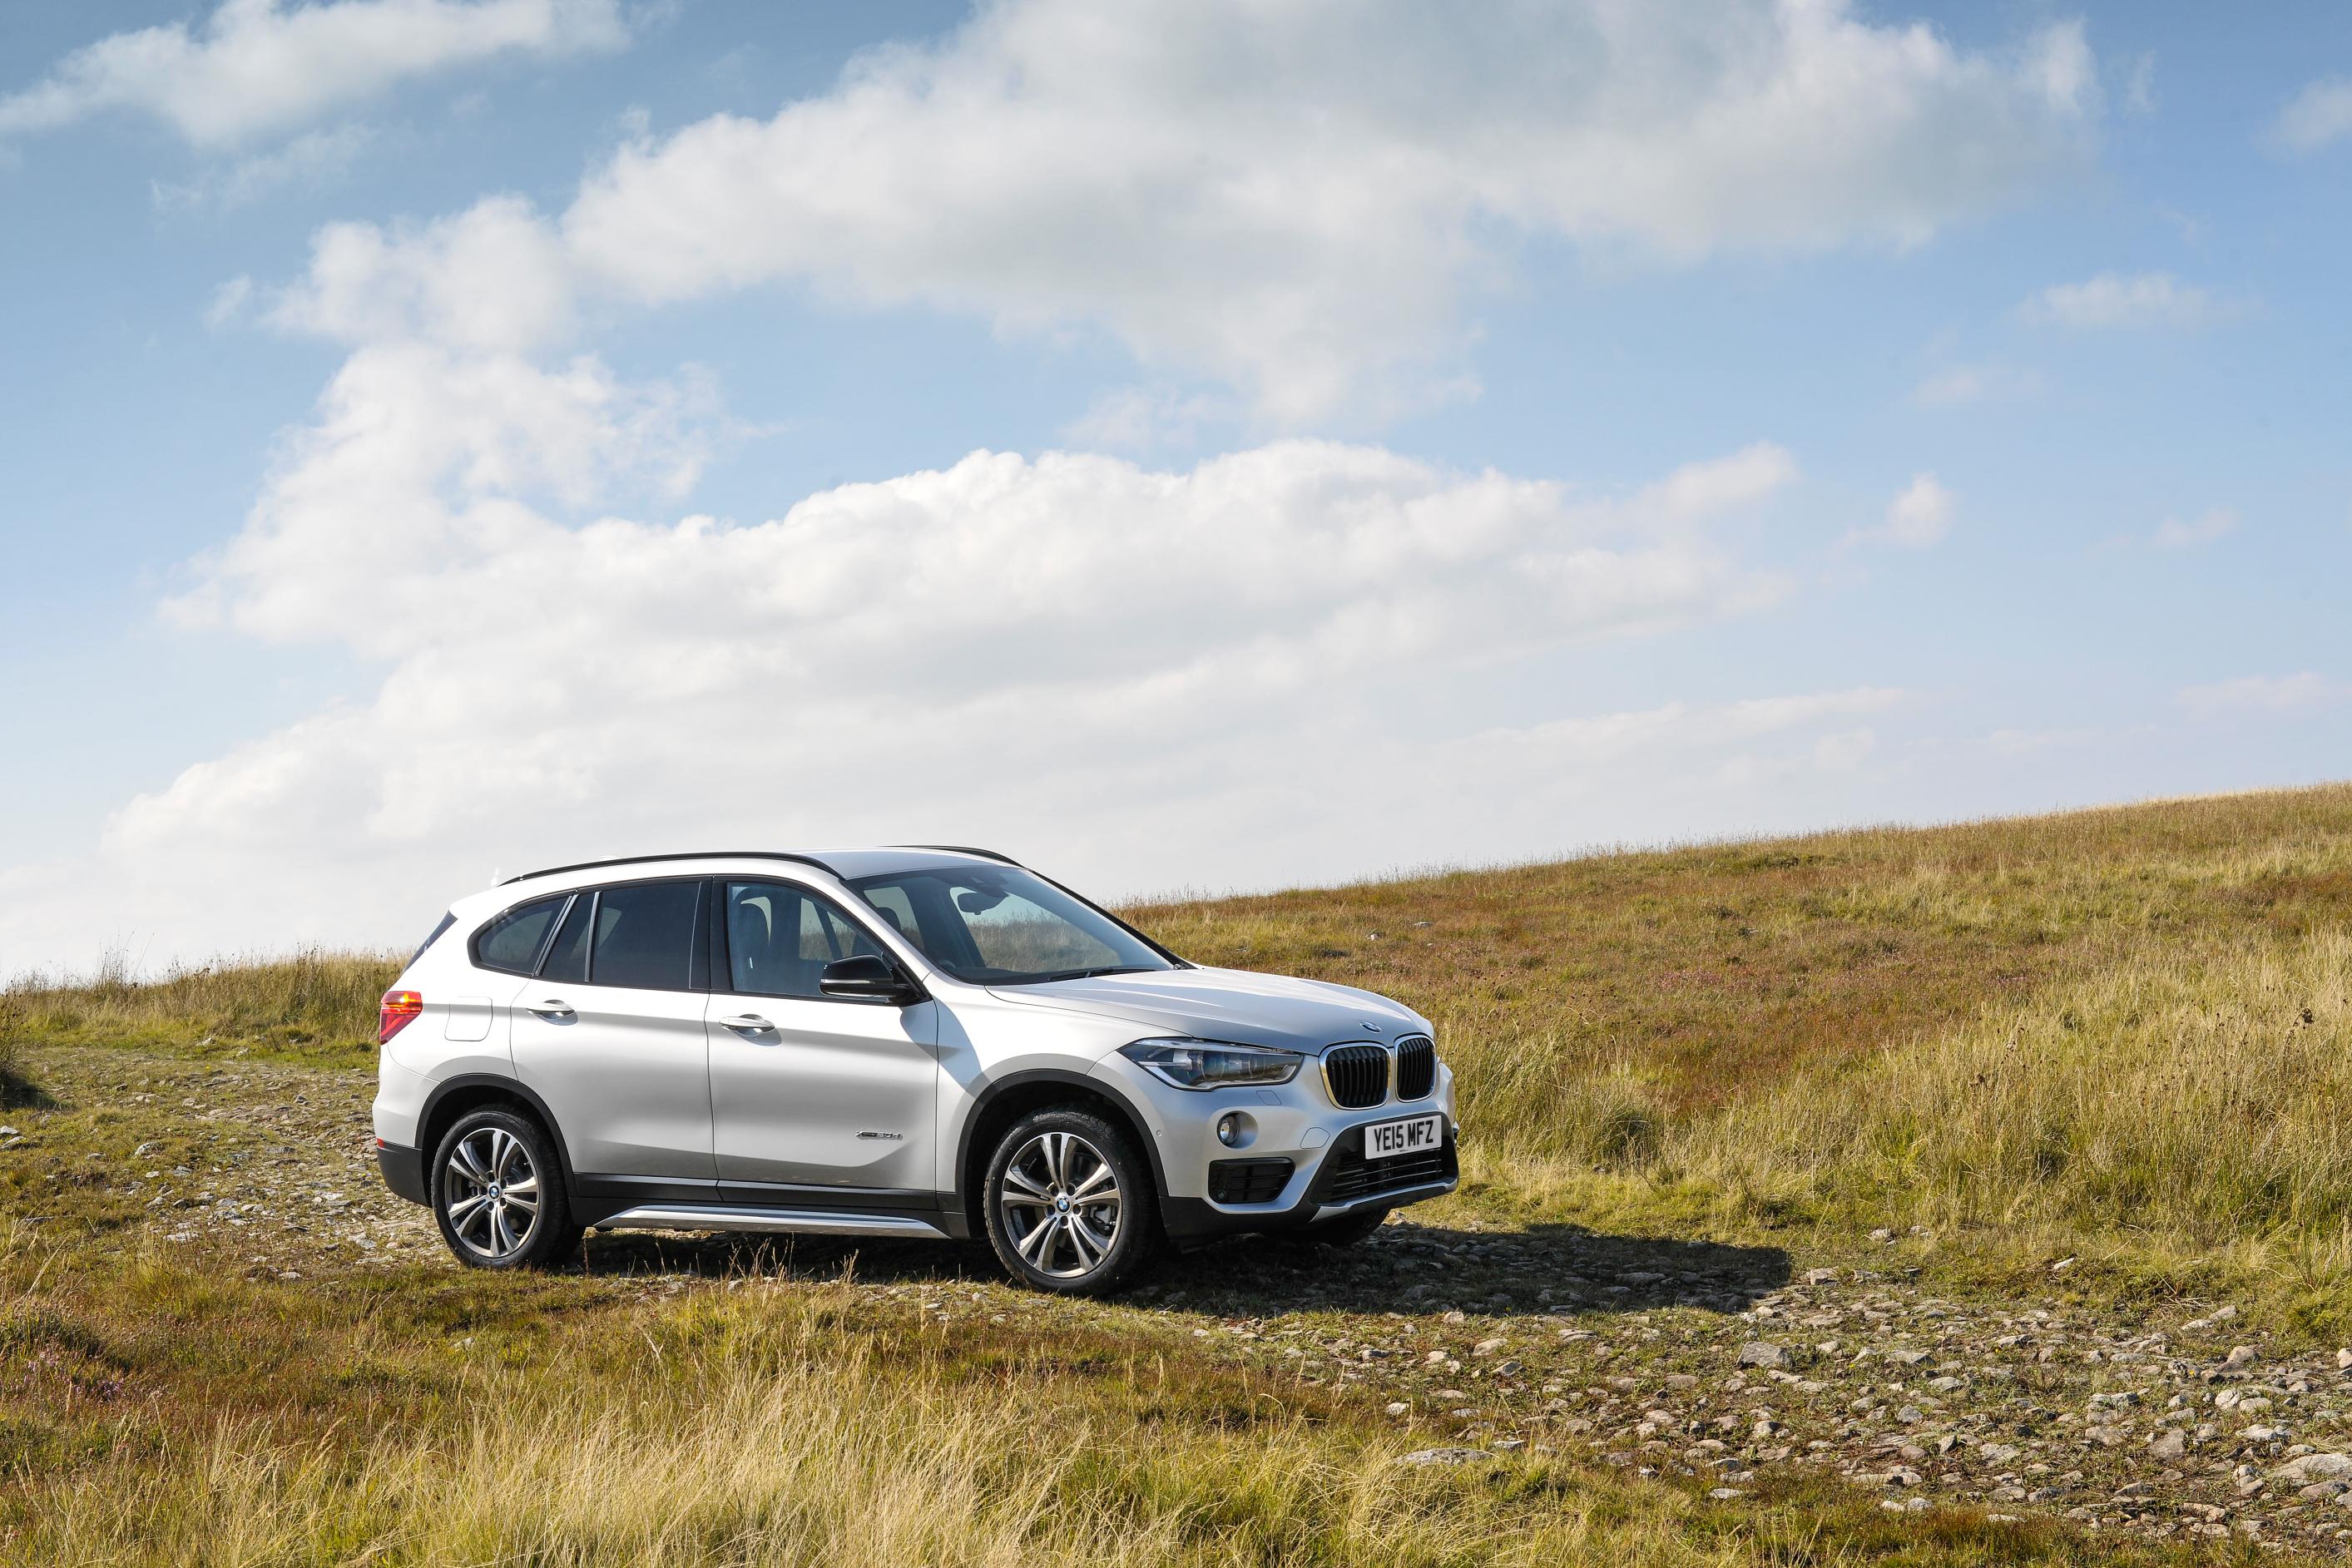 BMW X1 review - can Munich's smallest SUV compete with rivals?